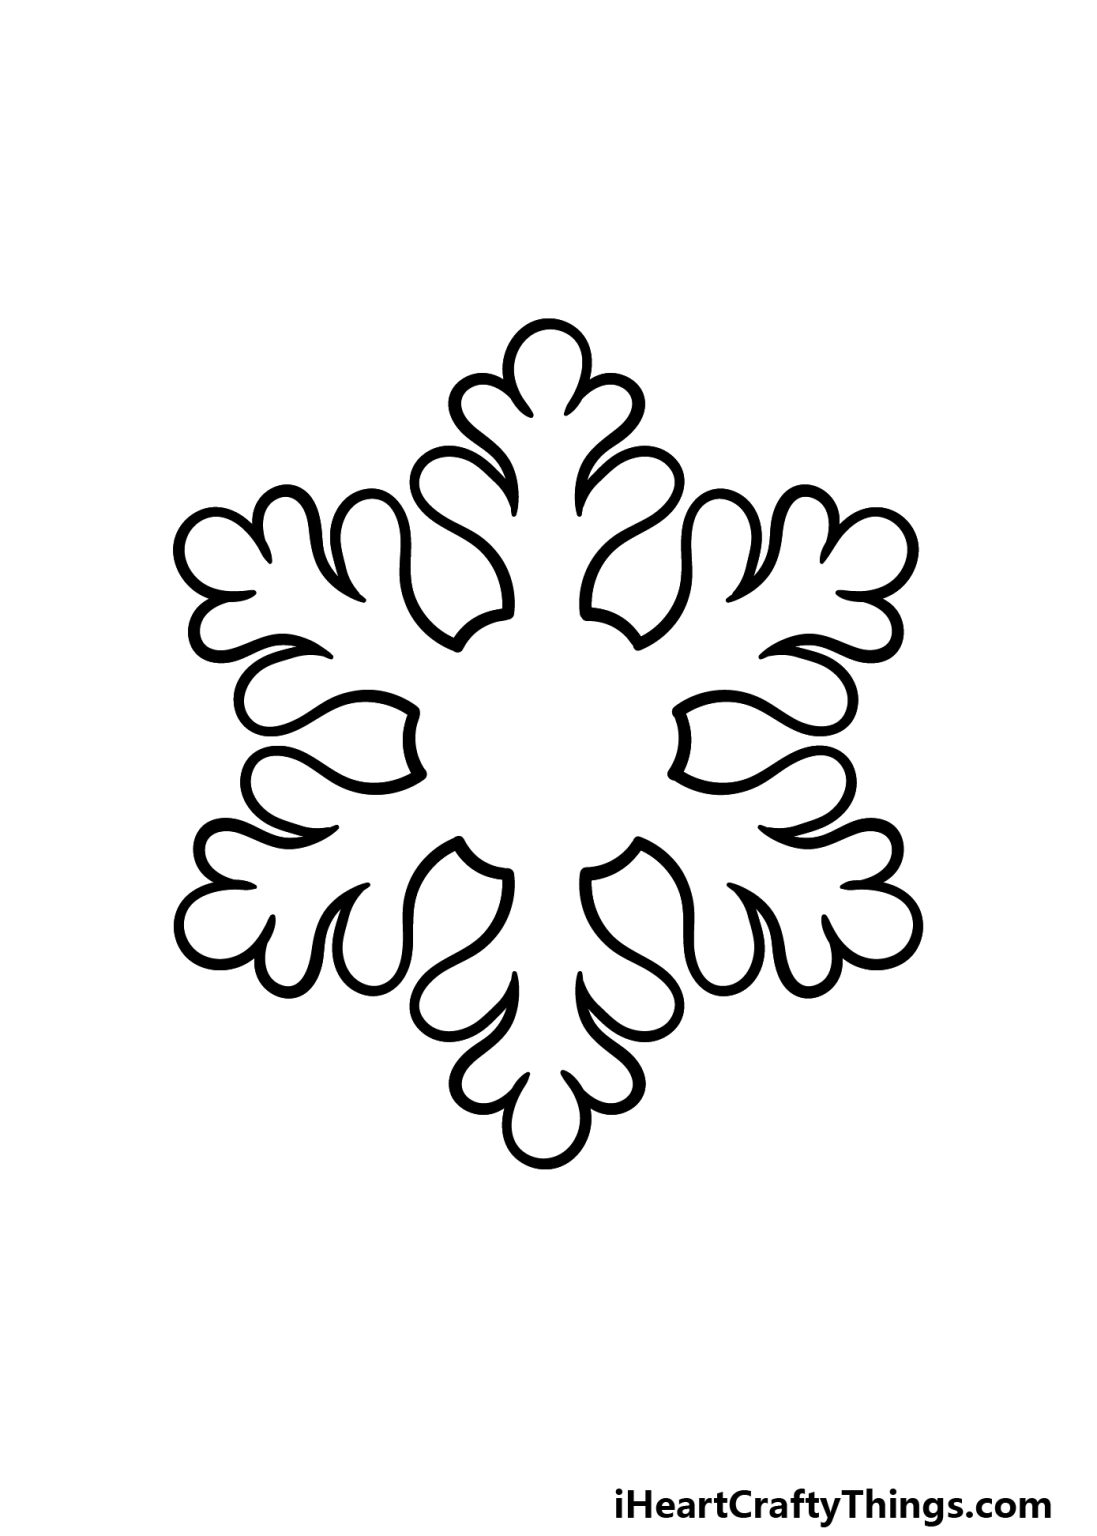 Cartoon Snowflake Drawing How To Draw A Cartoon Snowflake Step By Step